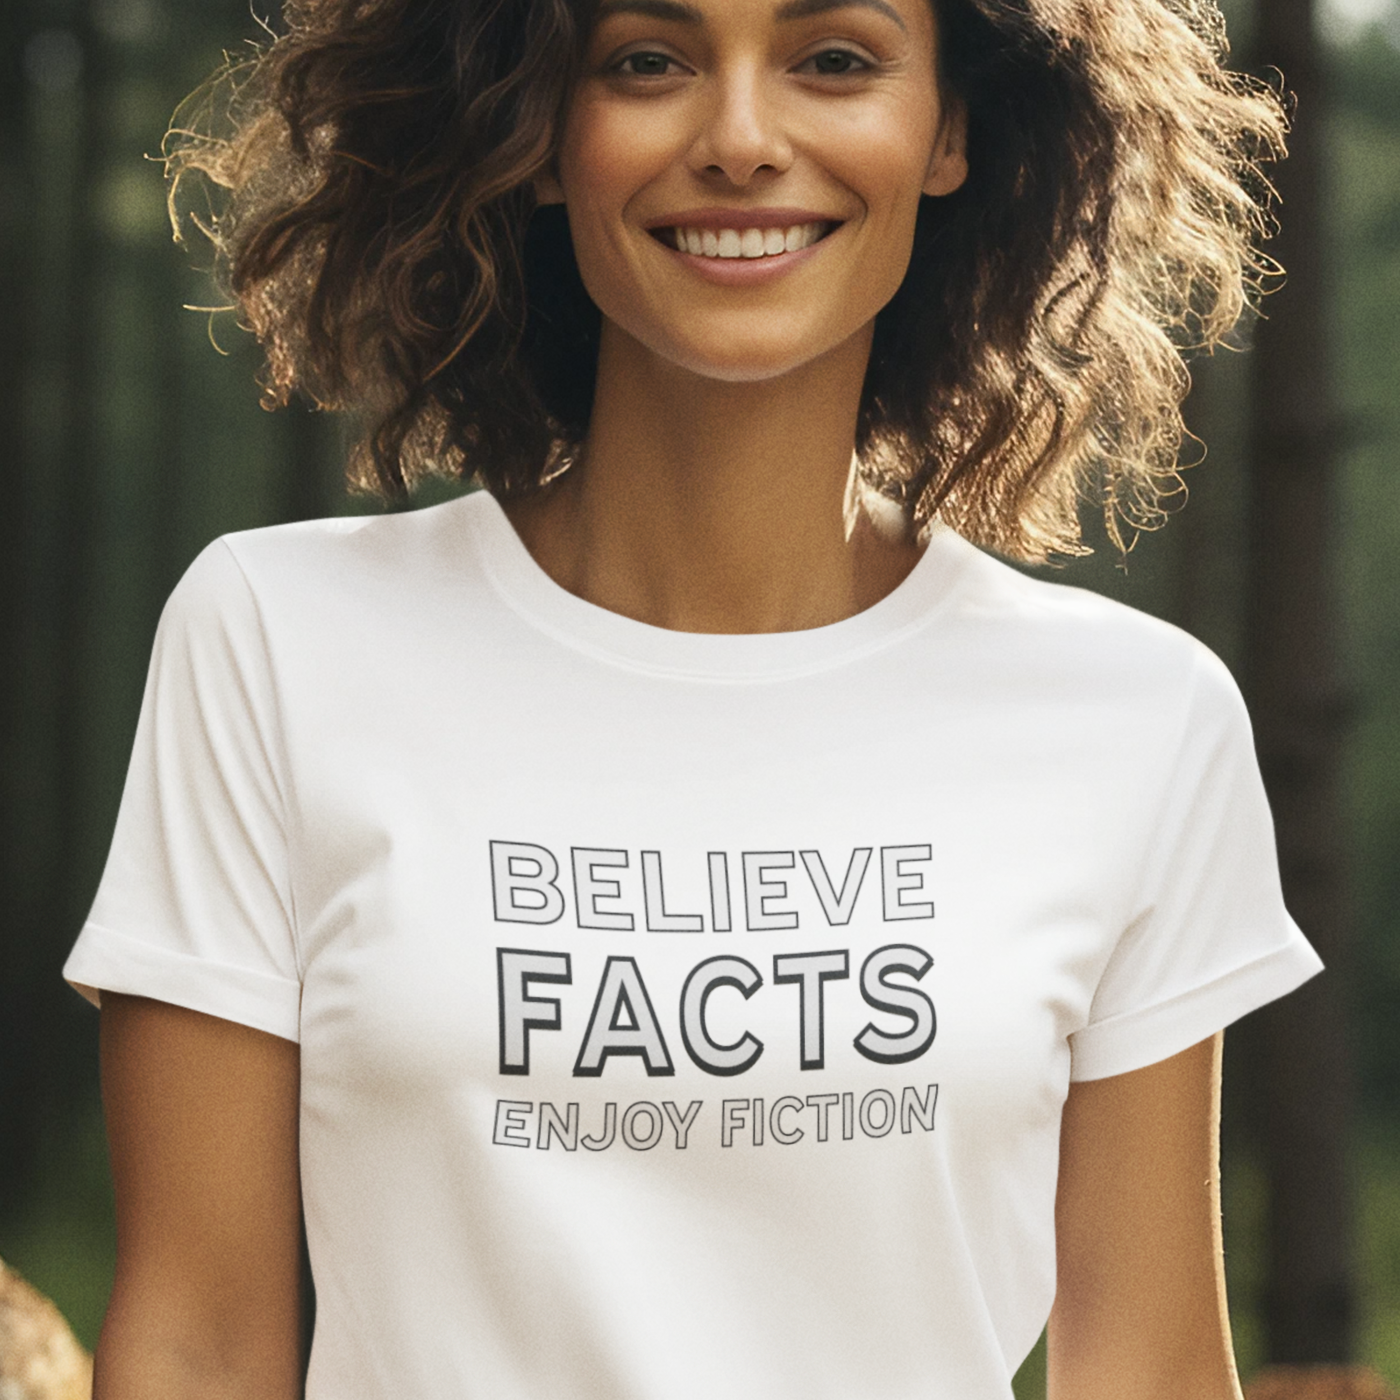 Facts and fiction t shirt